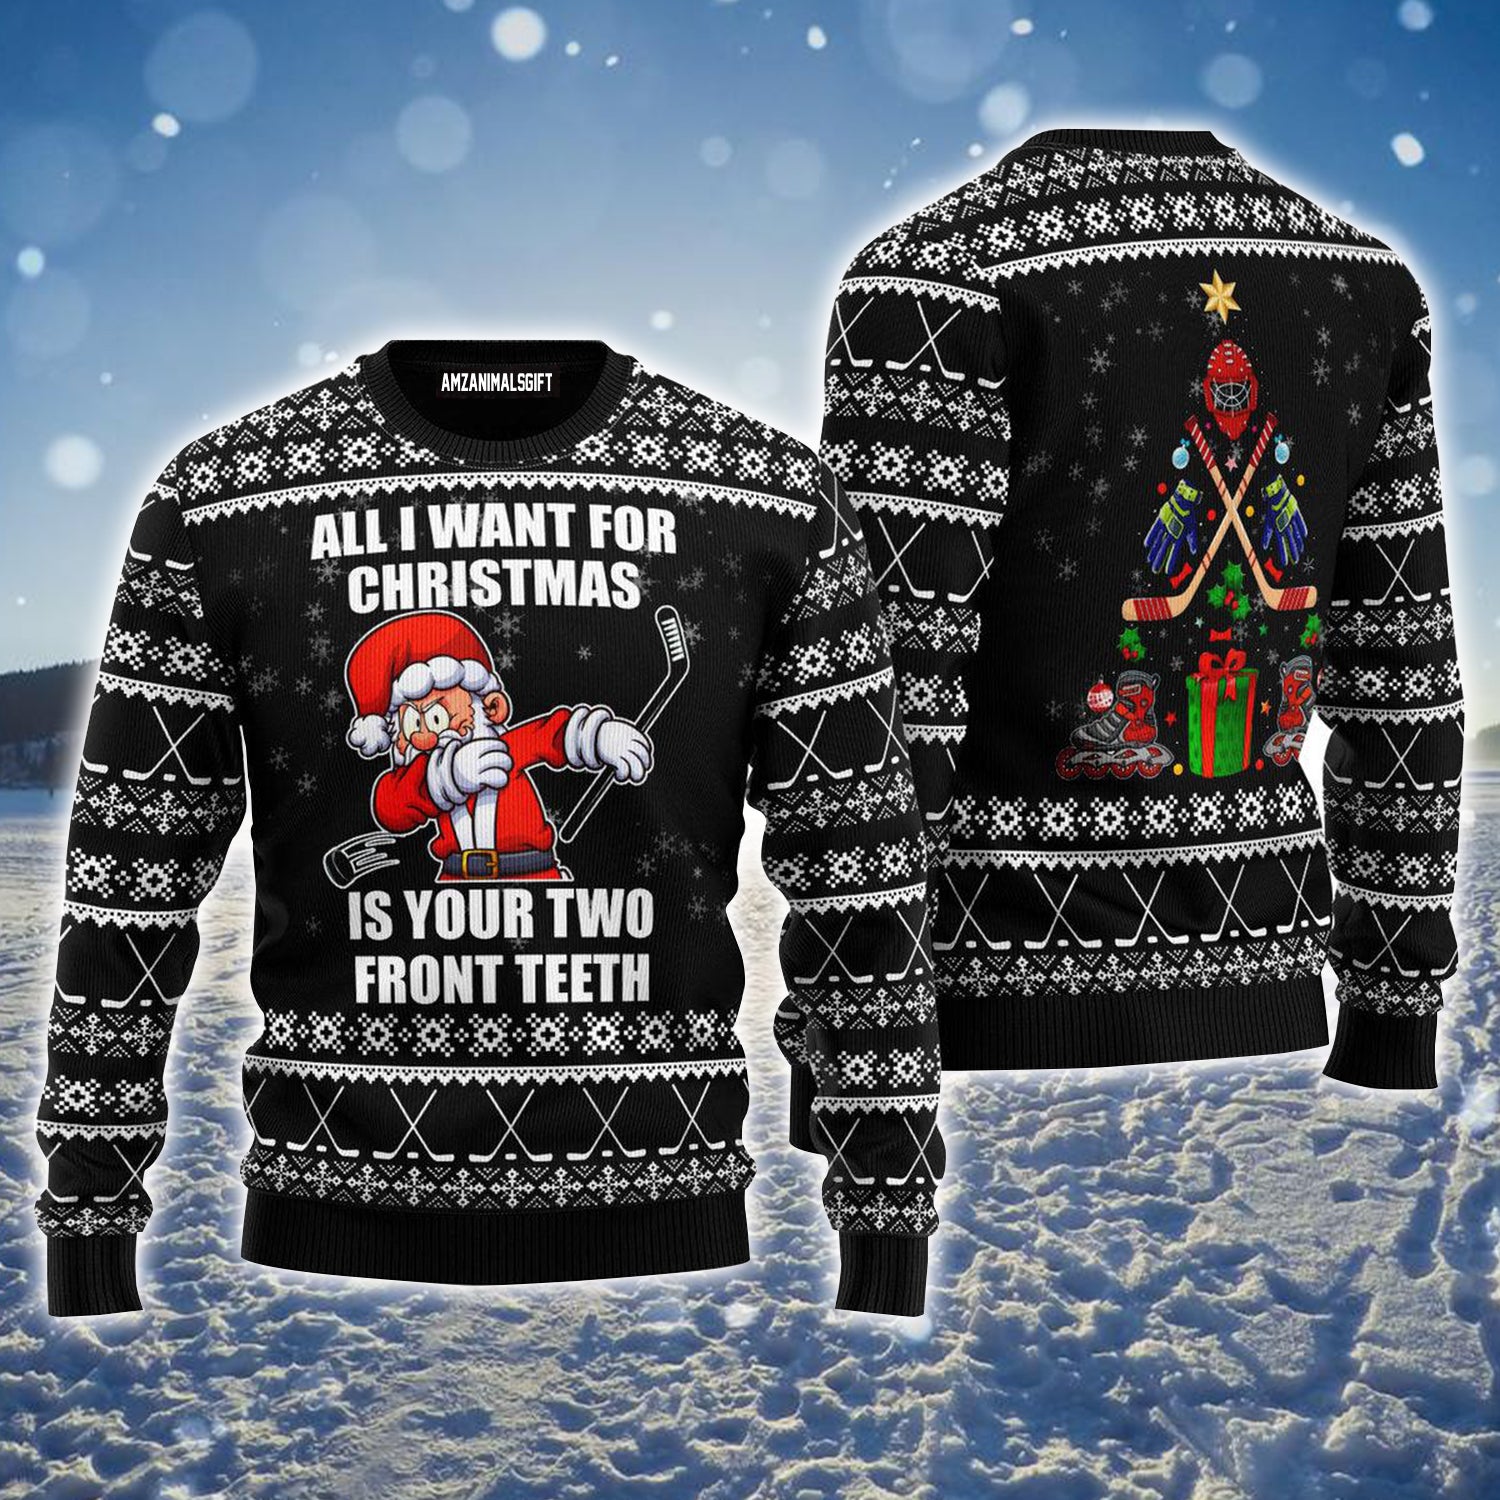 Santa Claus Ugly Christmas Sweater, Santa Plays Hockey Christmas Pattern Ugly Sweater For Men & Women - Perfect Gift For Christmas, Hockey Lovers